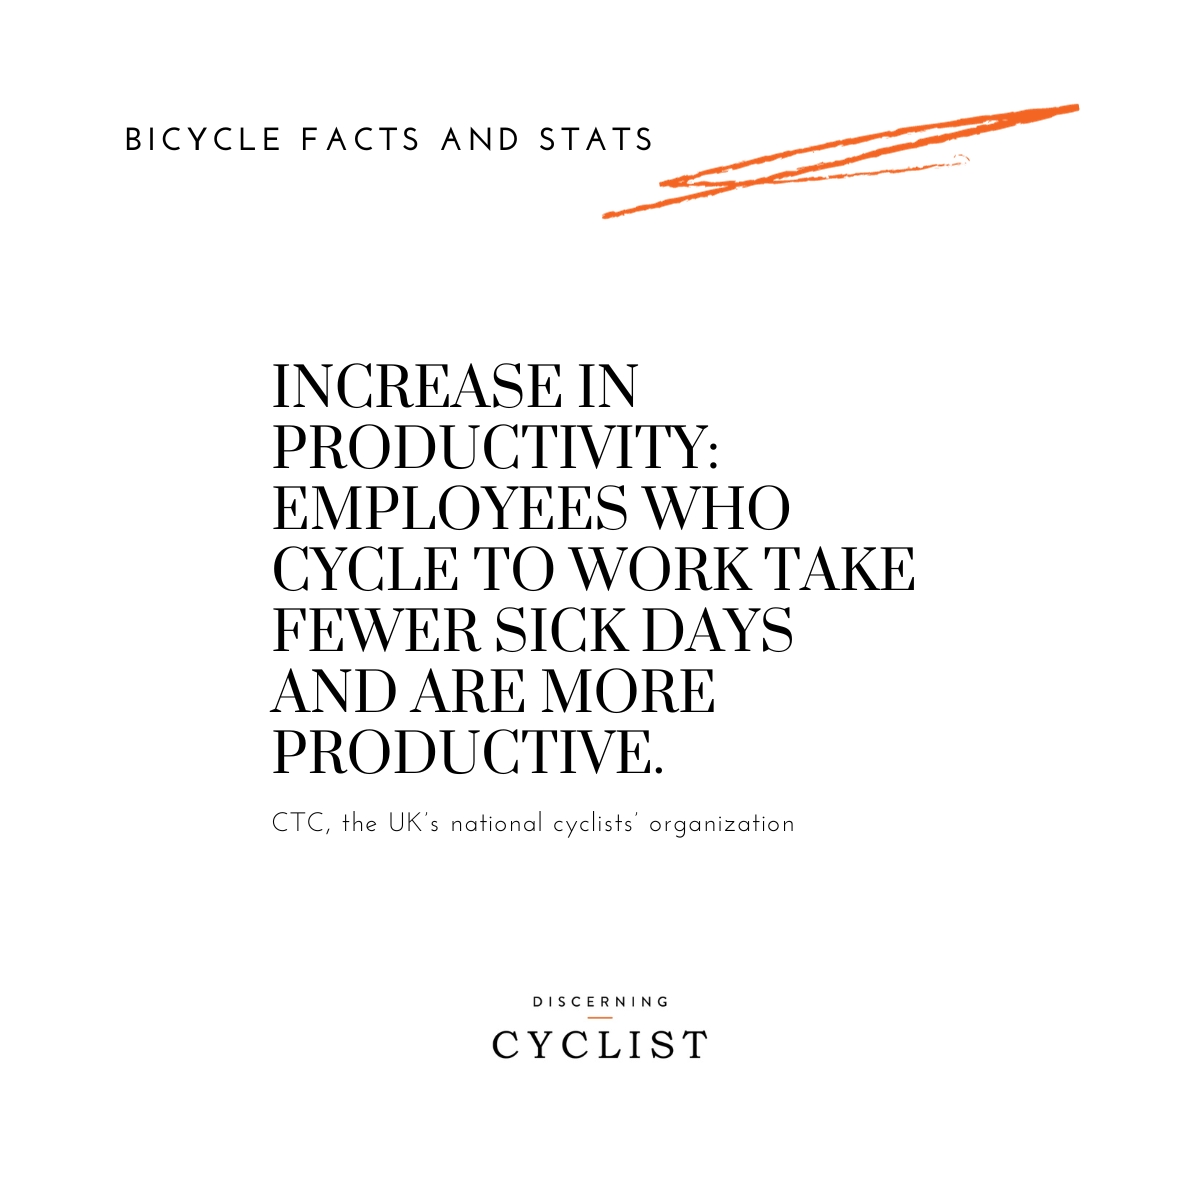 Increase in Productivity: Employees who cycle to work take fewer sick days and are more productive.